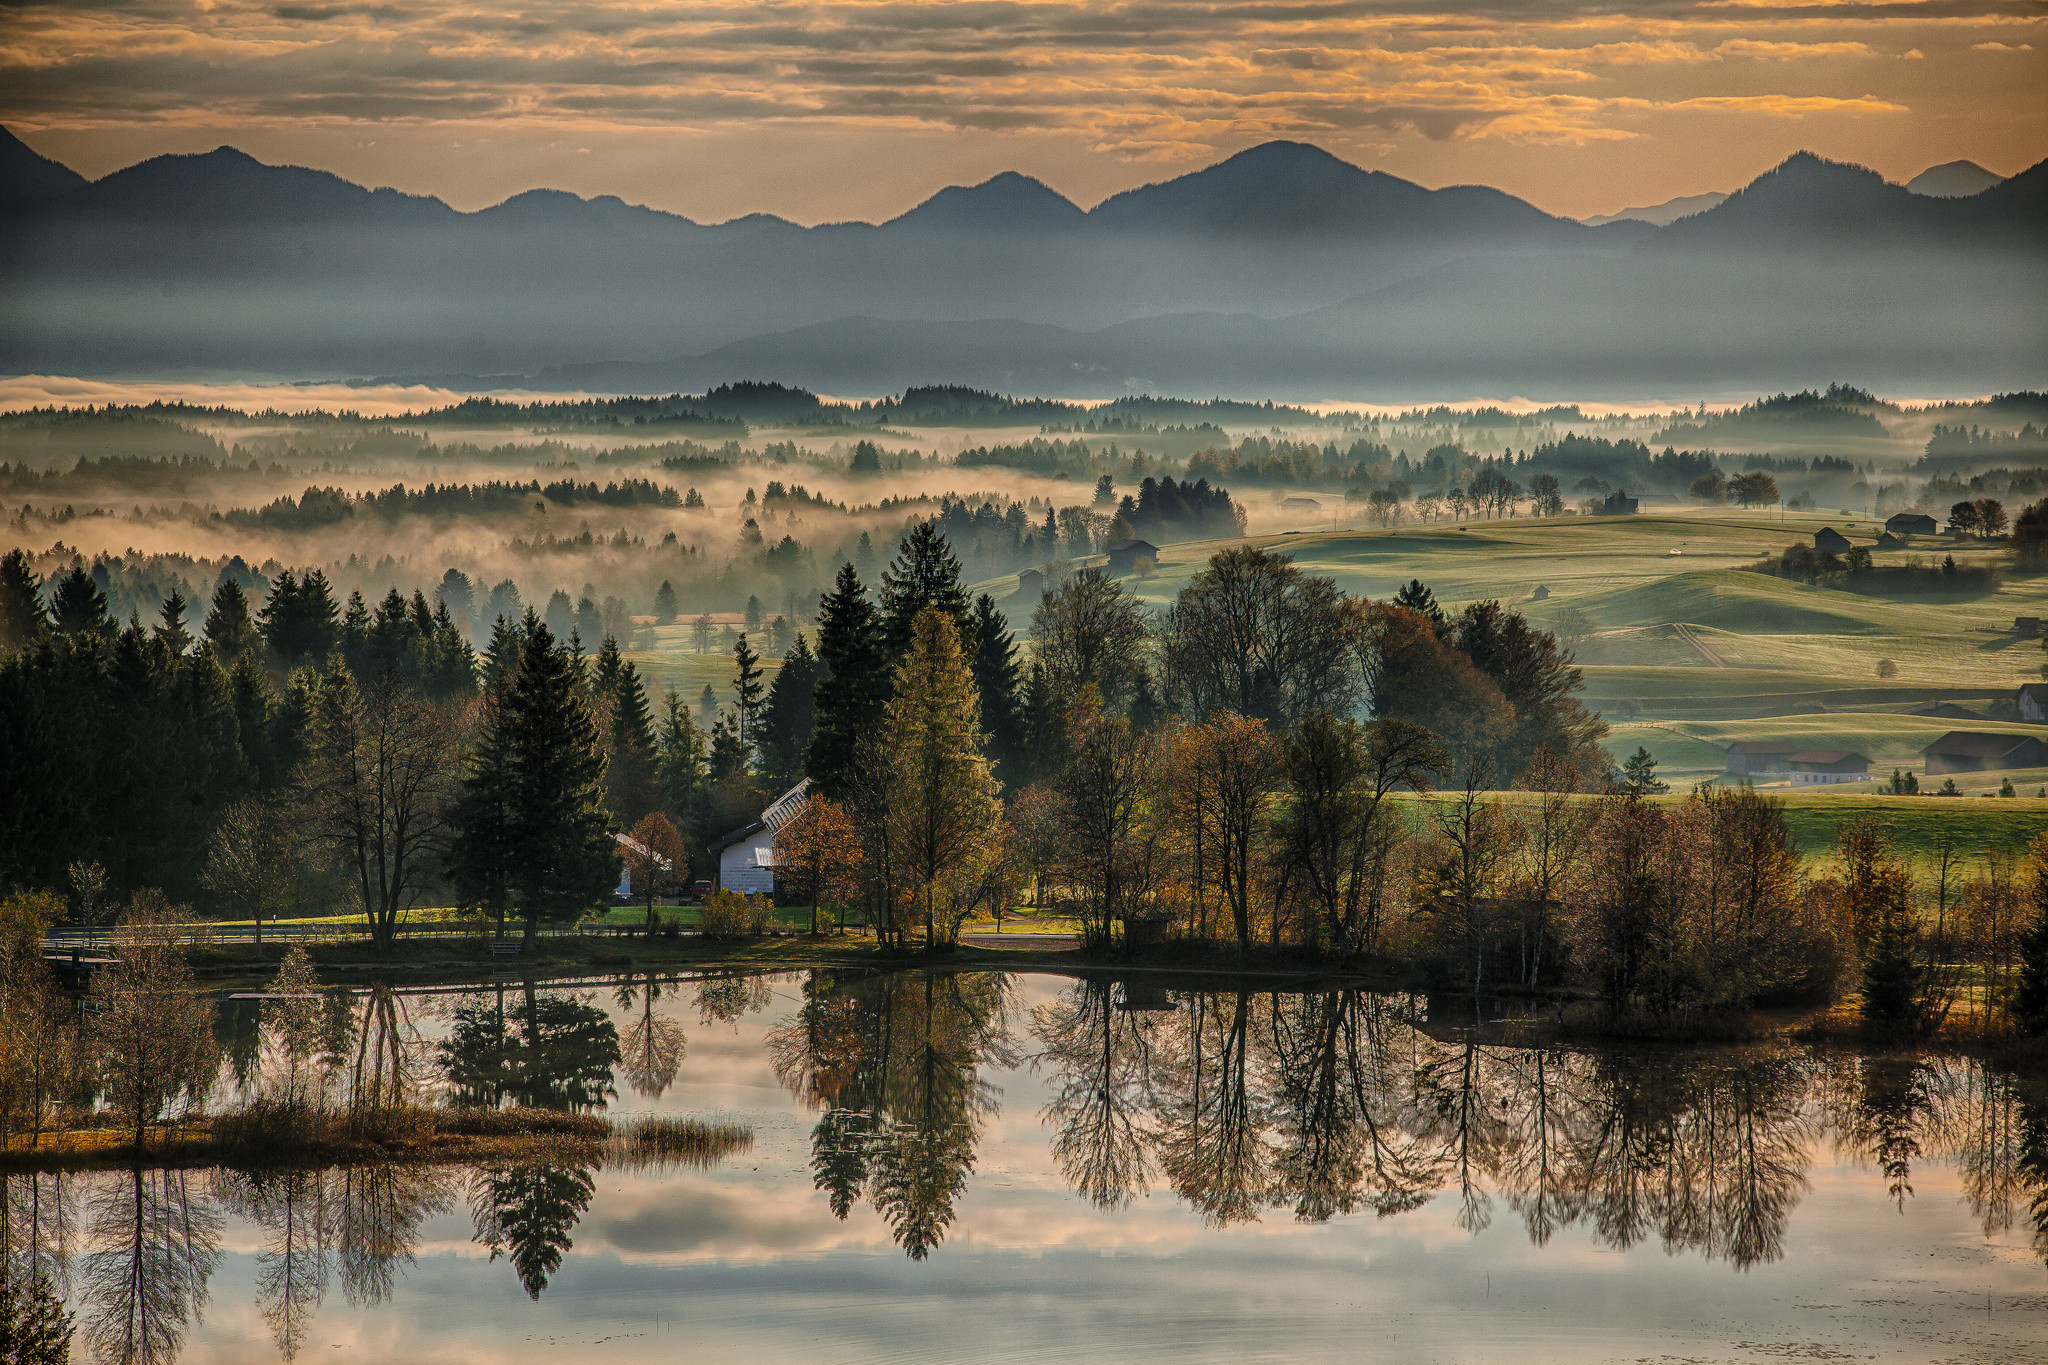 2048x1365 Bavaria Germany autumn river morning dawn reflection trees mountains landscape  wallpaper |  | 171726 | WallpaperUP